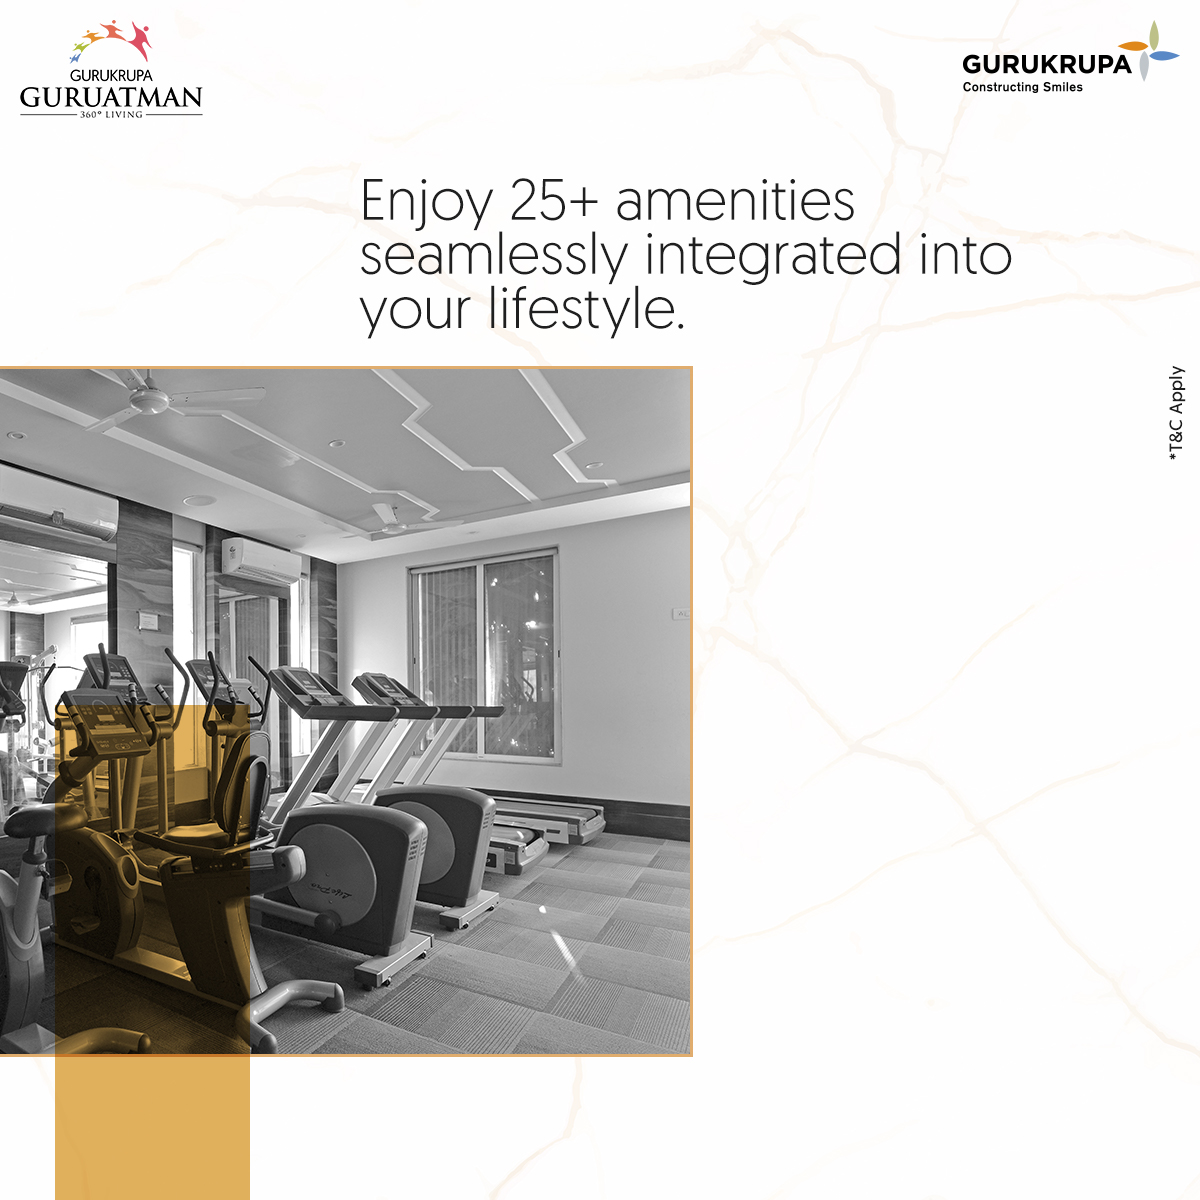 Live your best life at Guru Atman, where amenities are meticulously designed to fulfill your desires and elevate your lifestyle.

#GurukrupaGroup #GuruAtman #Connectivity #ResonatesWithAspirations #IdealLivingSpace #SeamlessPath #DreamHome #Aspirations #SmoothConnectivity #Kalyan